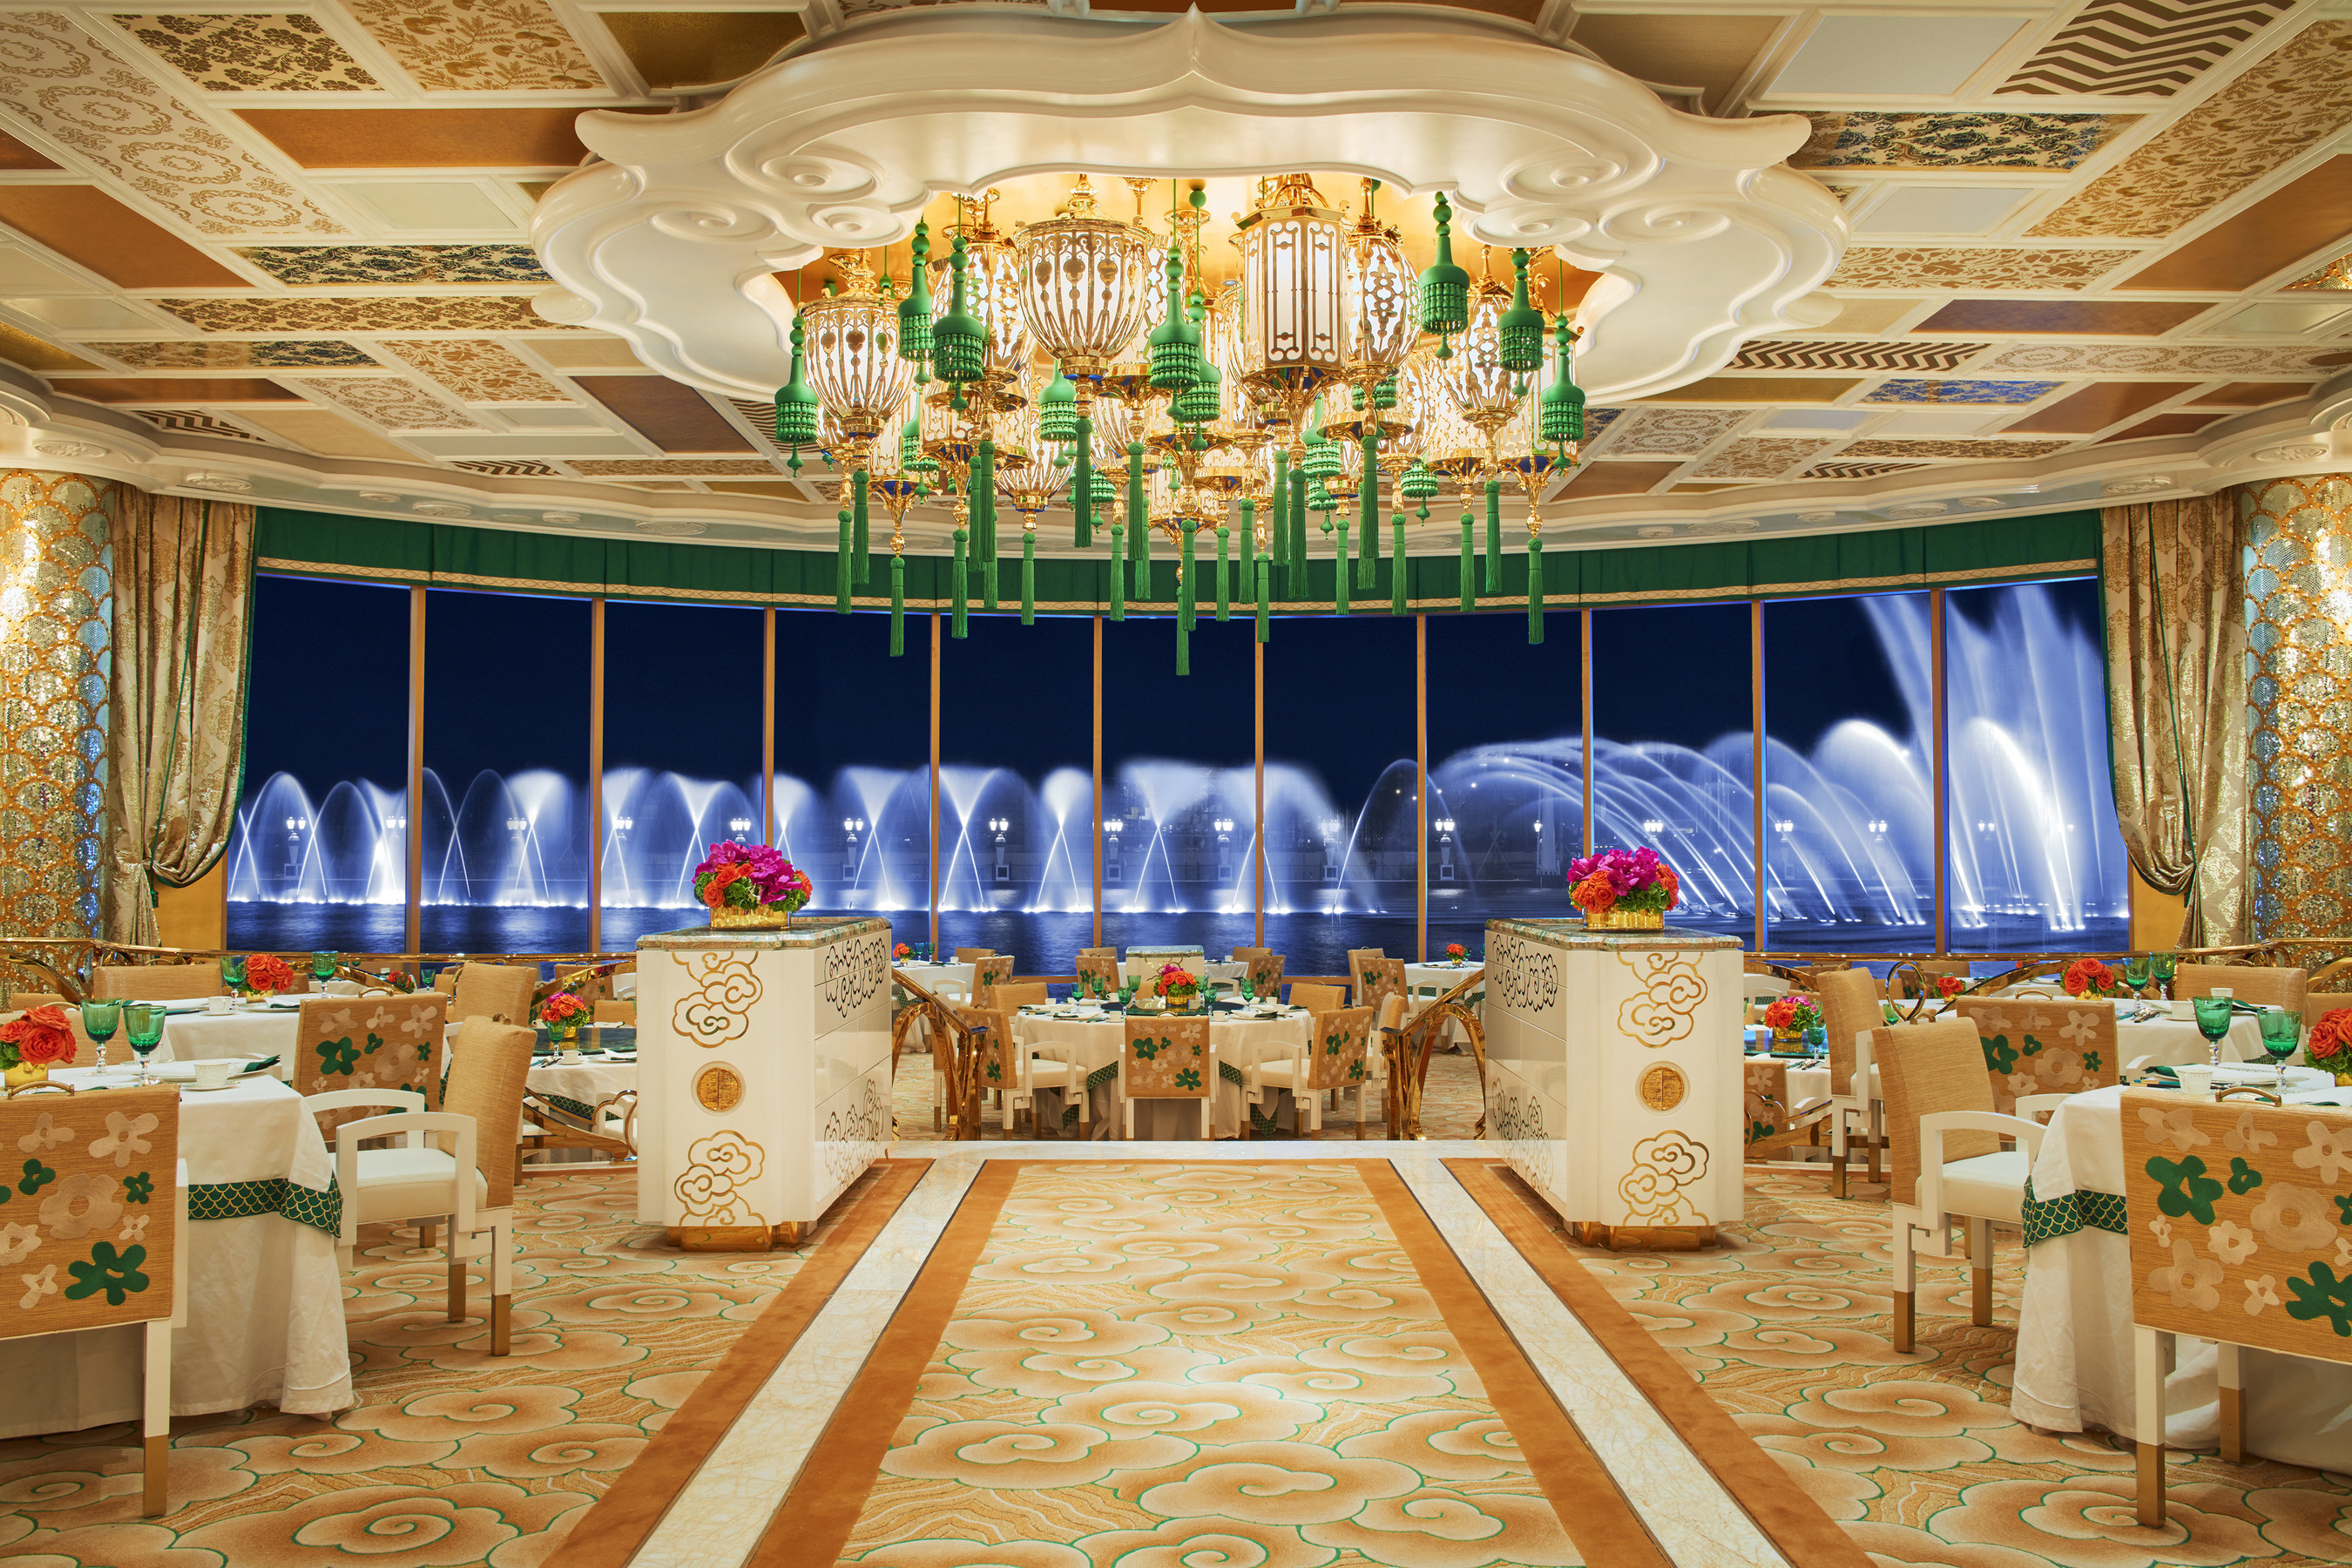 Wing Lei Palace is the epitome of Wynn Palace’s fascination with Chinoiserie.